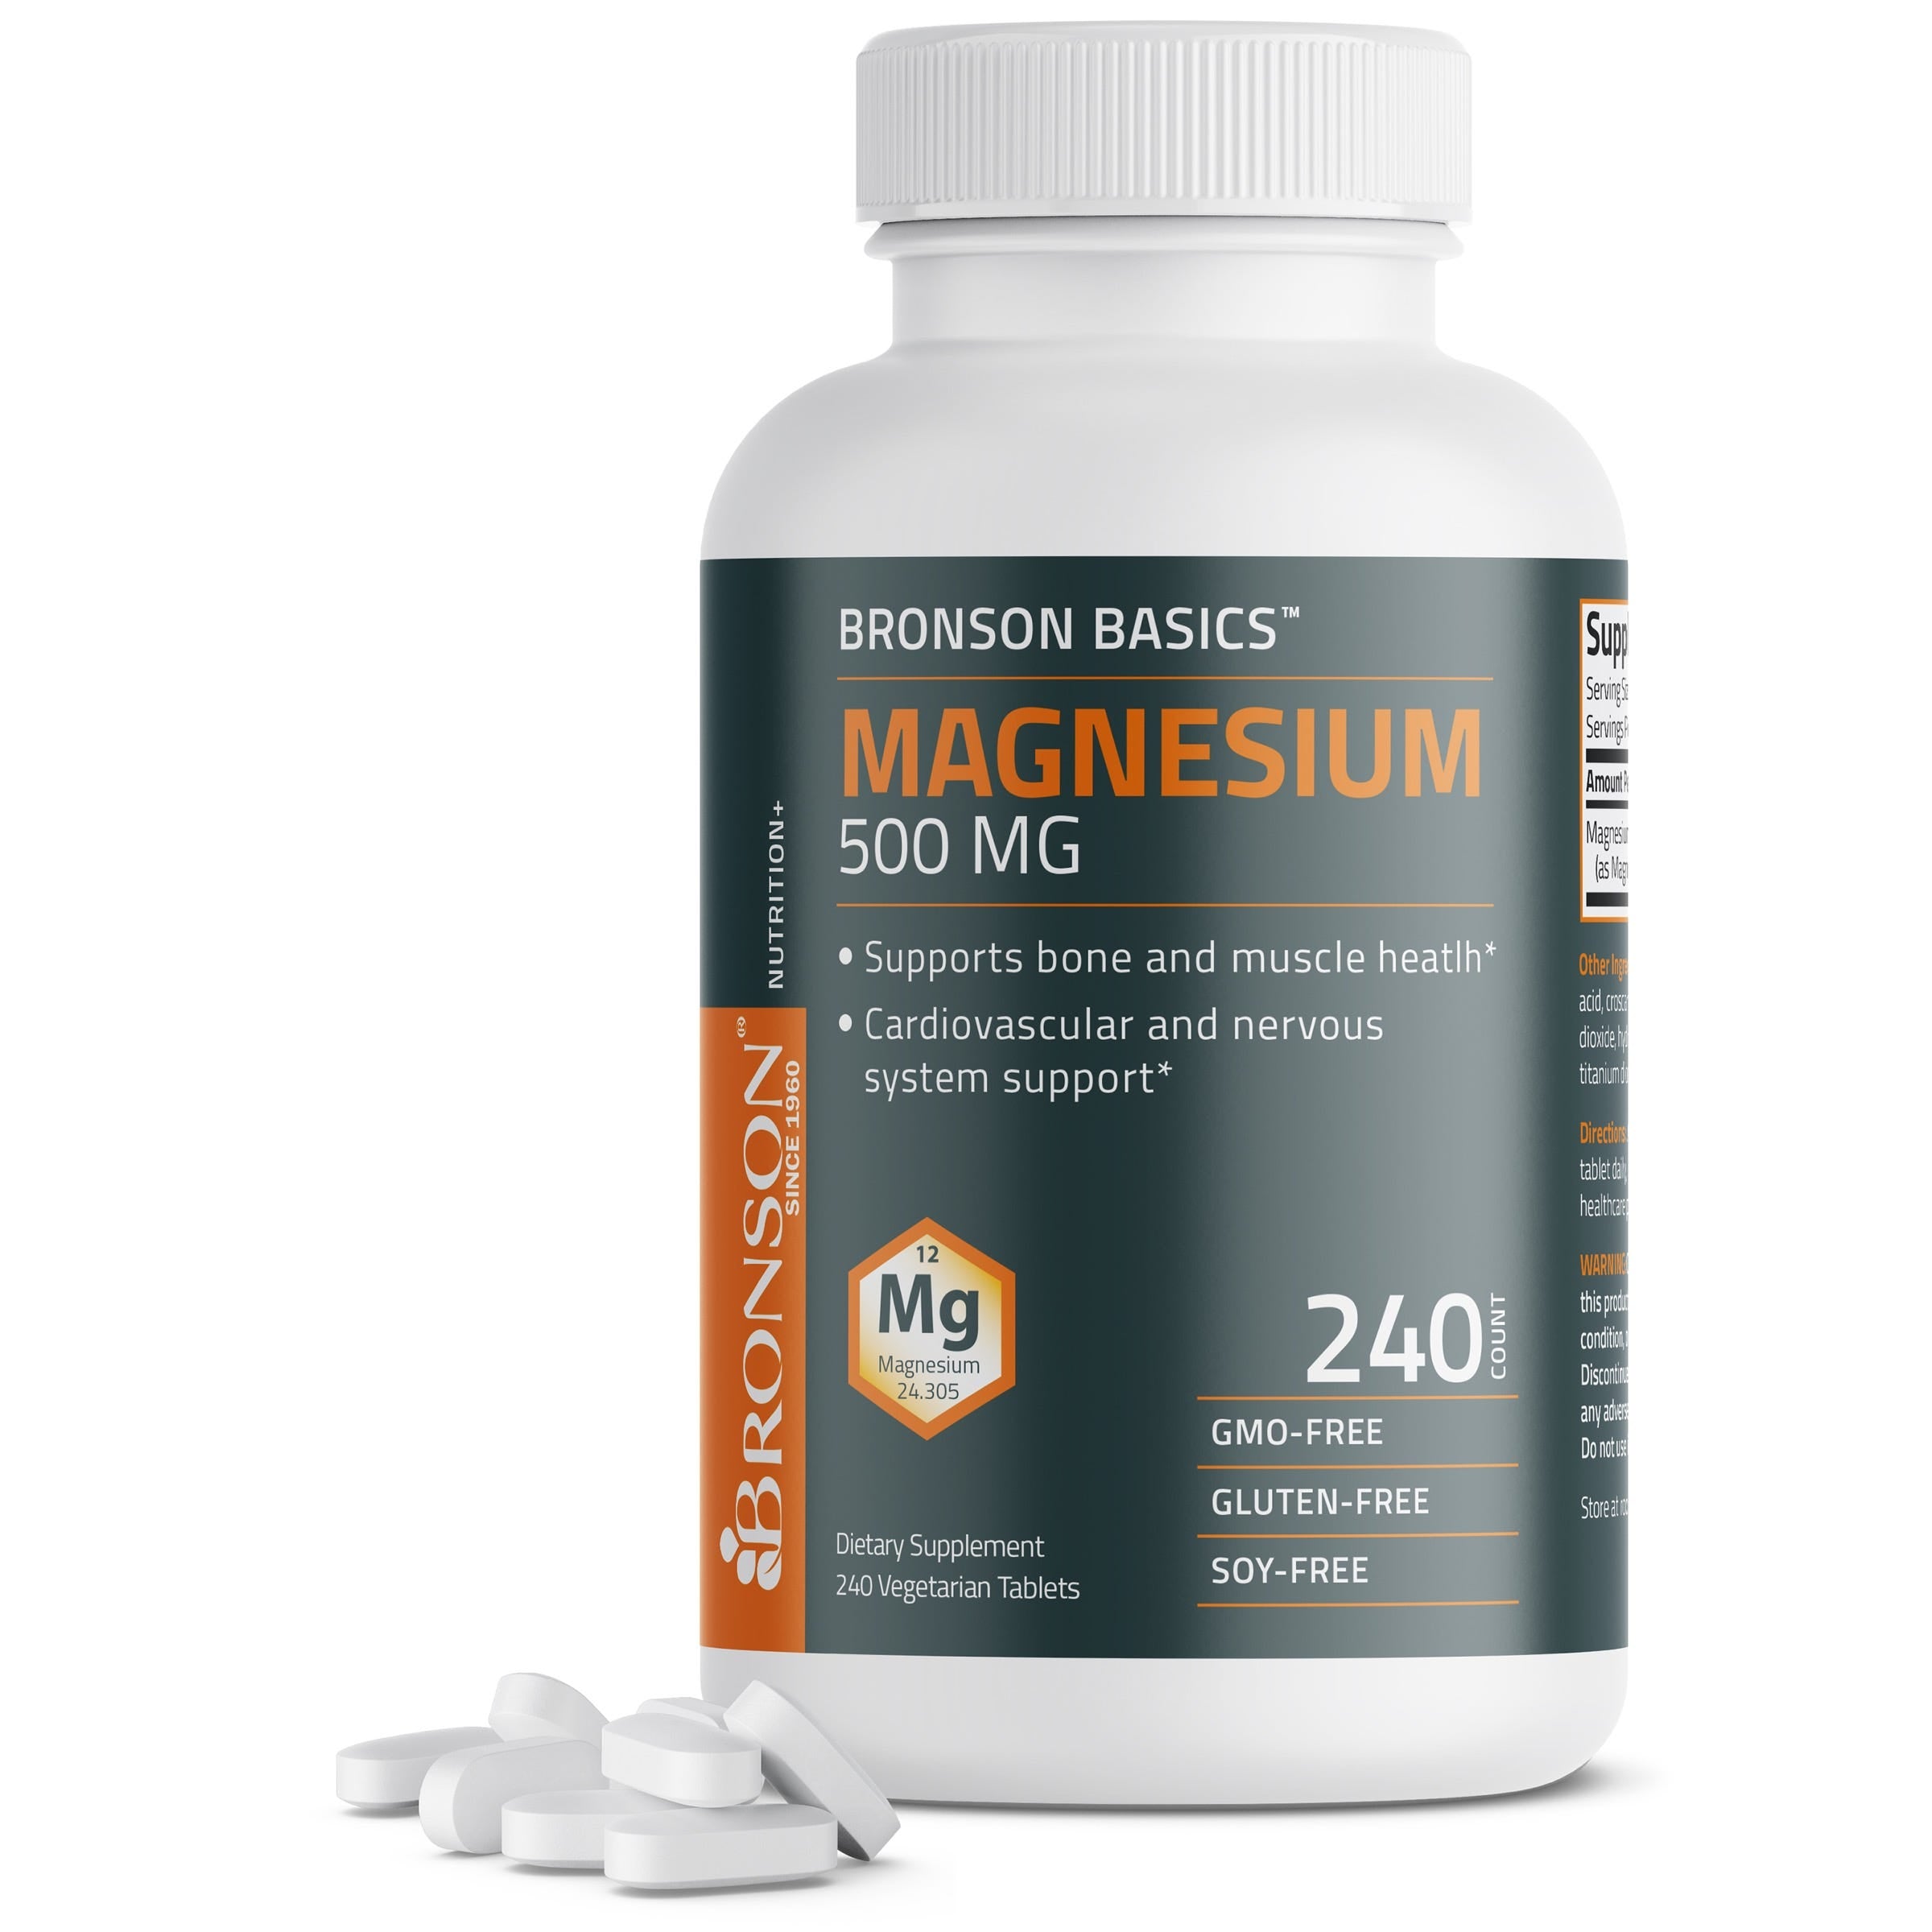 Magnesium 500 MG view 1 of 6